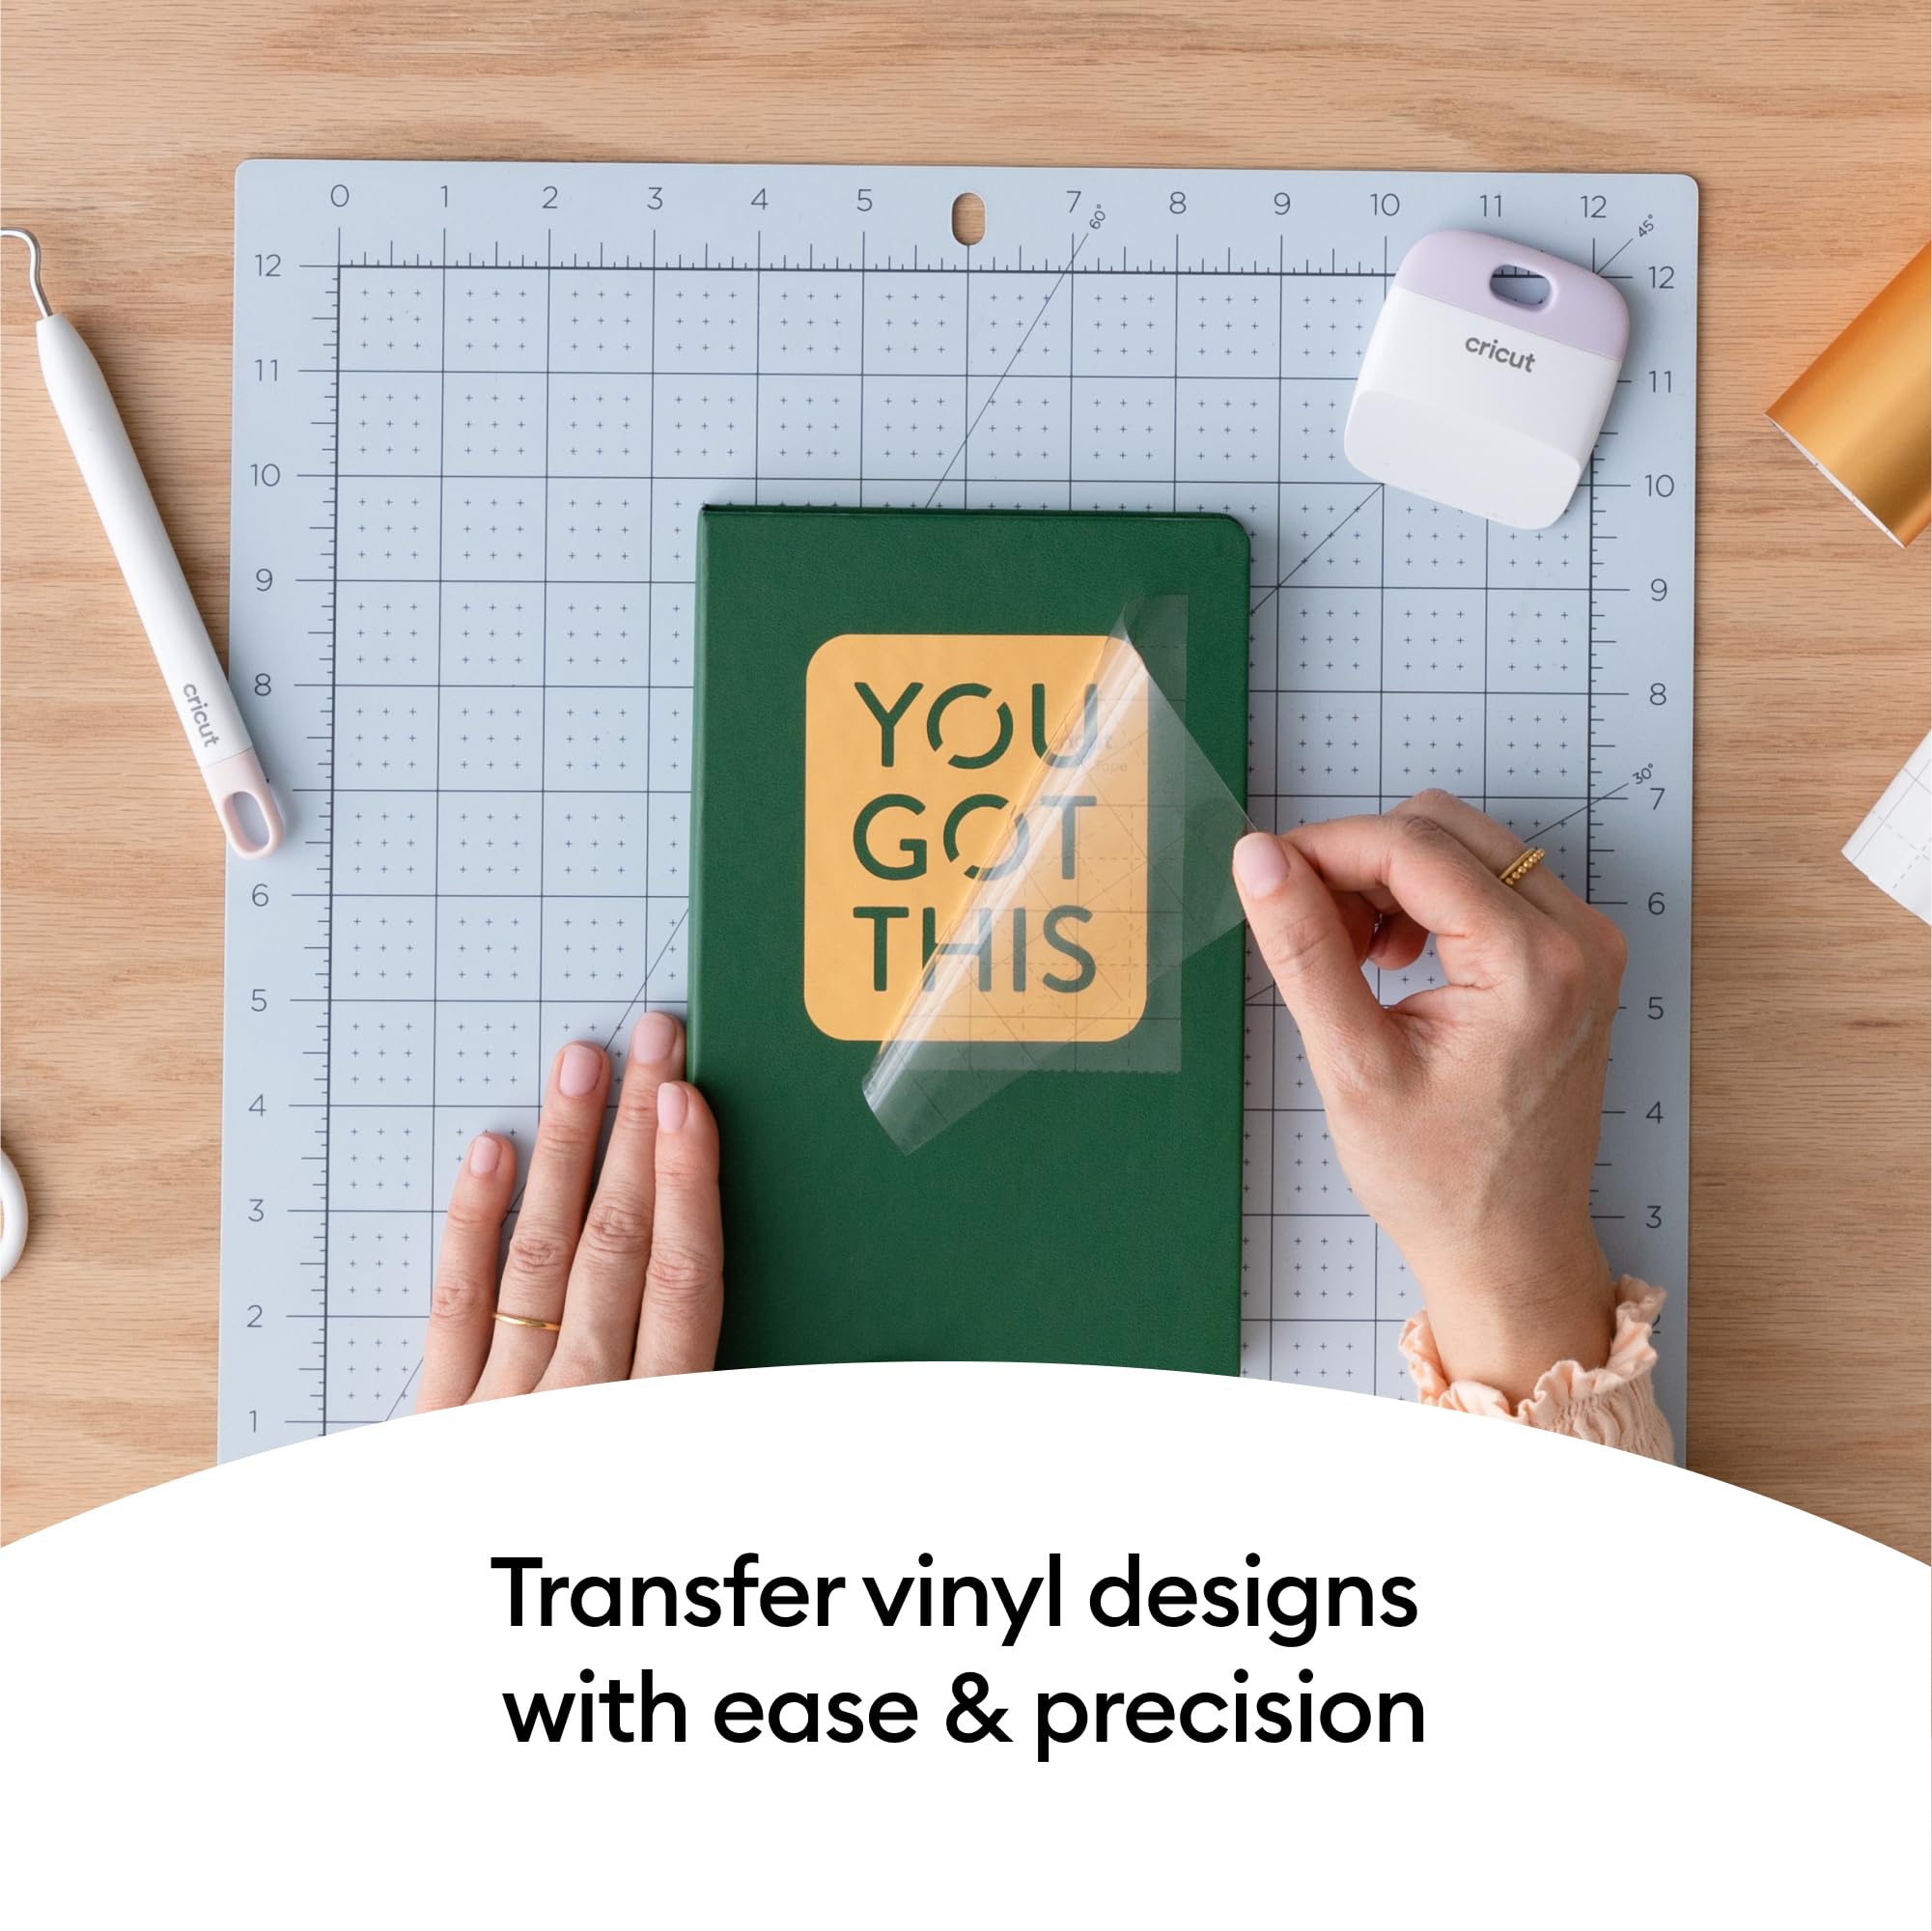 Cricut Joy Xtra Vinyl Transfer Tape (9.5 in x 3 ft), Clear Vinyl Transfer Paper for Labels, DIY Crafts & More, Works with Most Vinyl Types, For Cricut Joy Machine